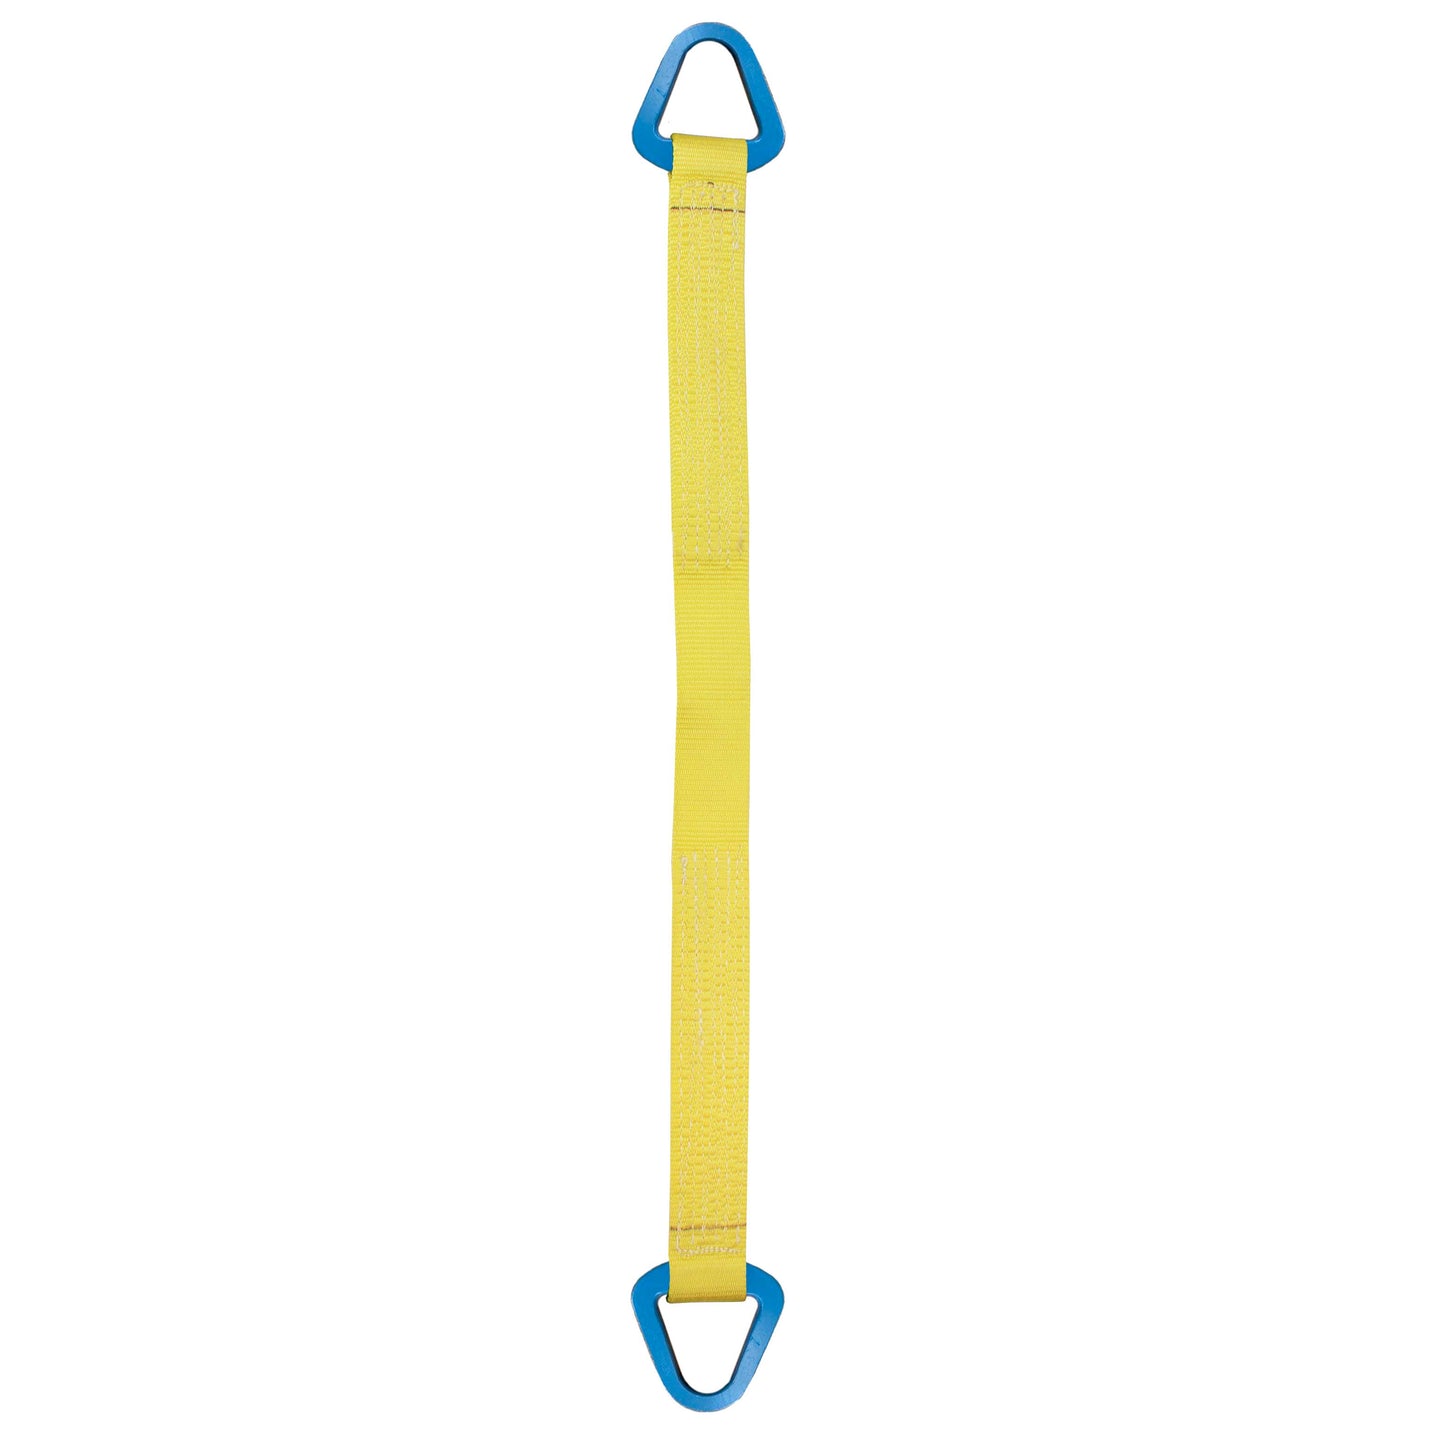 Nylon Lifting Sling Triangle 10 inch x 20 foot 2ply image 1 of 2